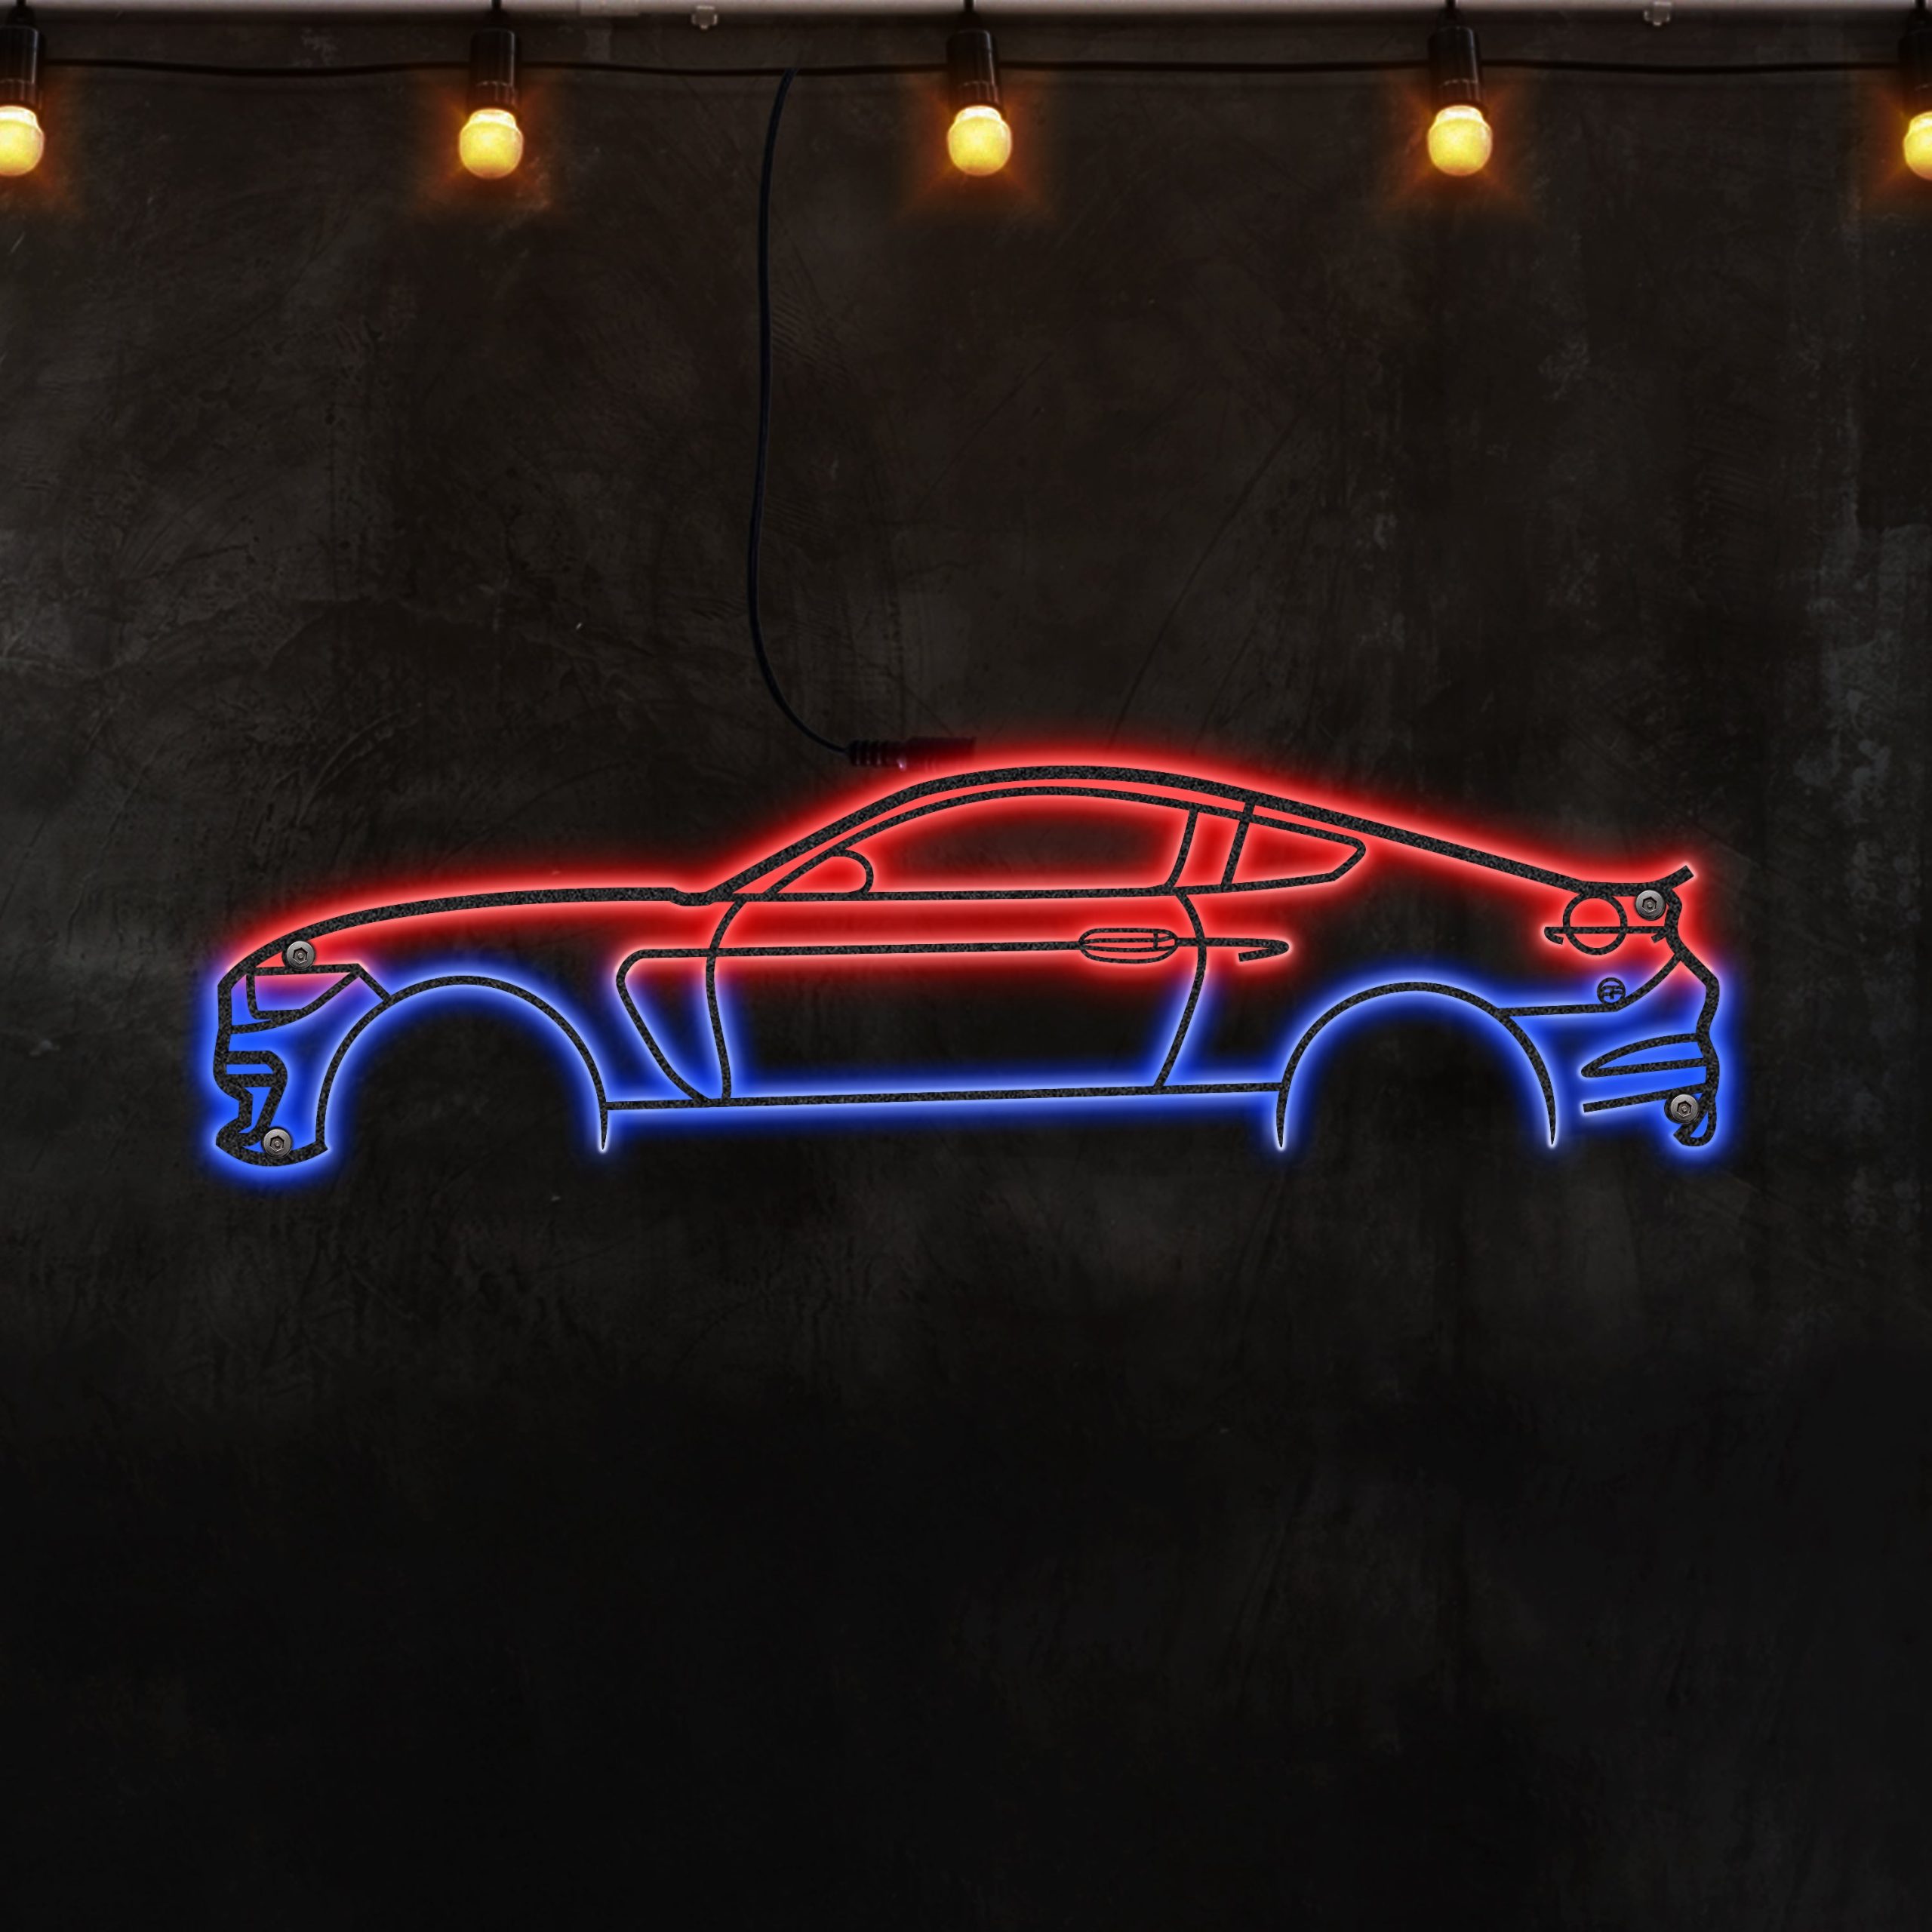 Mustang Shelby GT350 Metal Line Art Dual-Toned LED Backlit